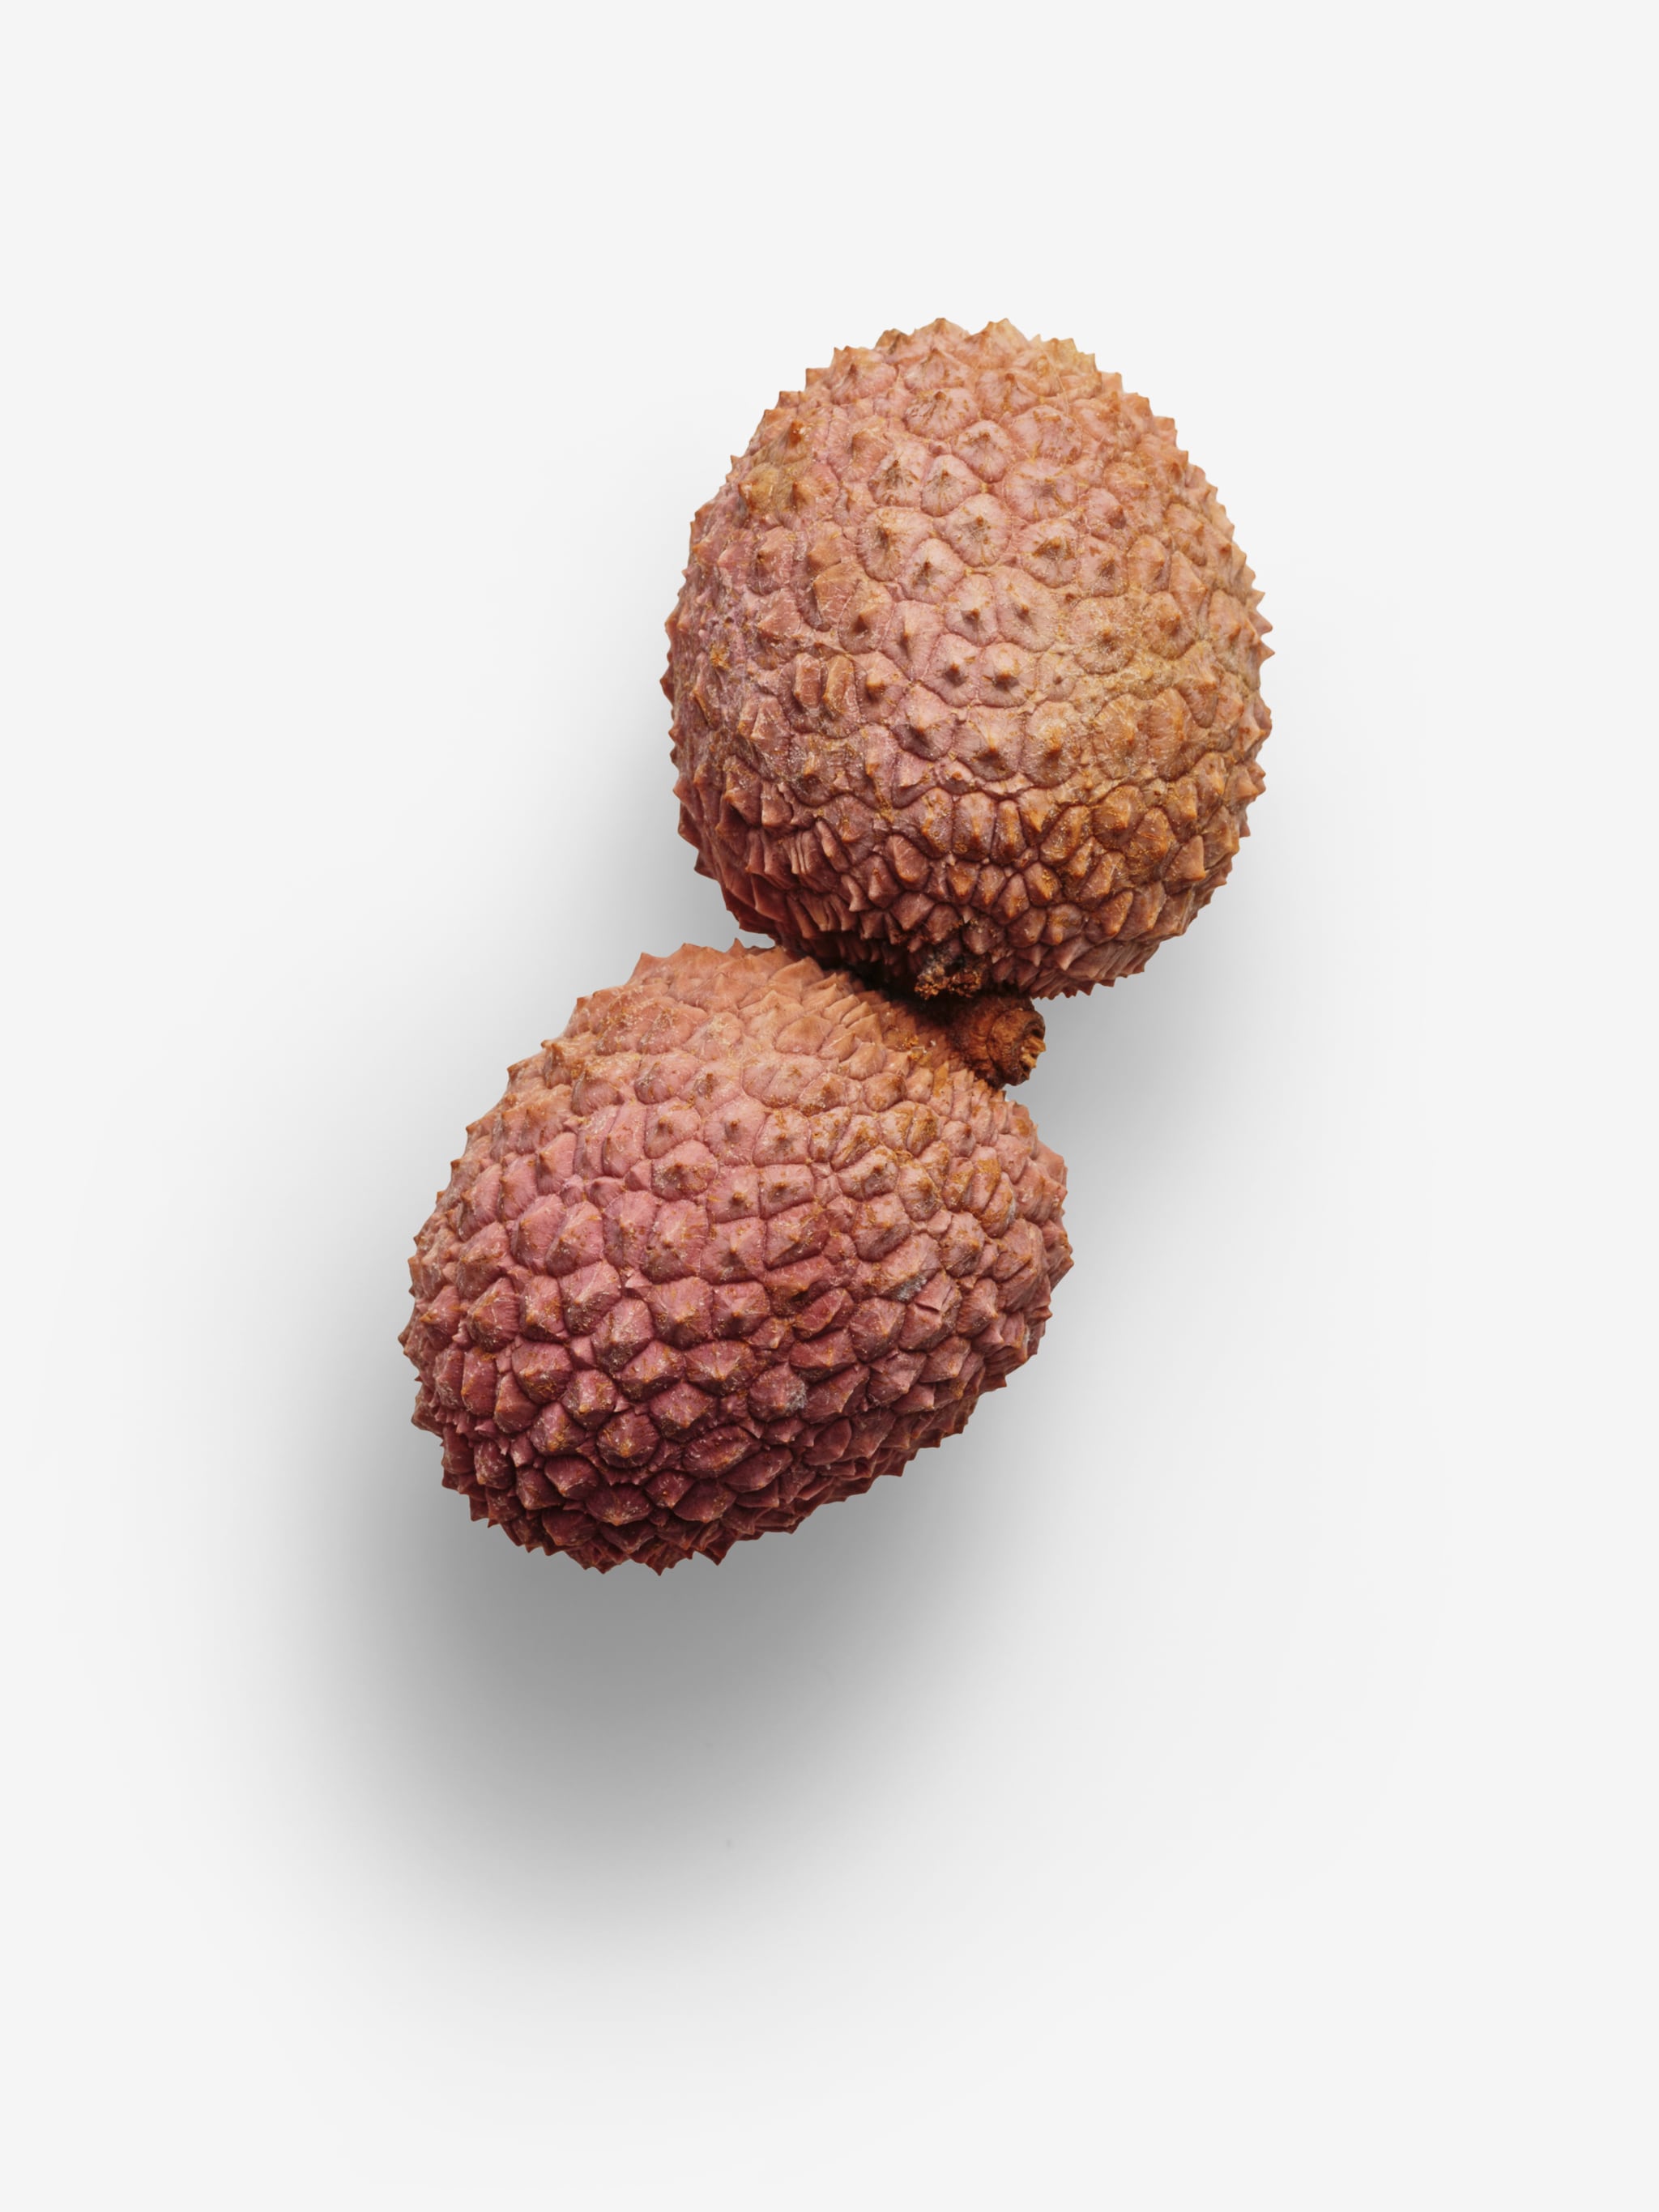 Lychee image asset with transparent background